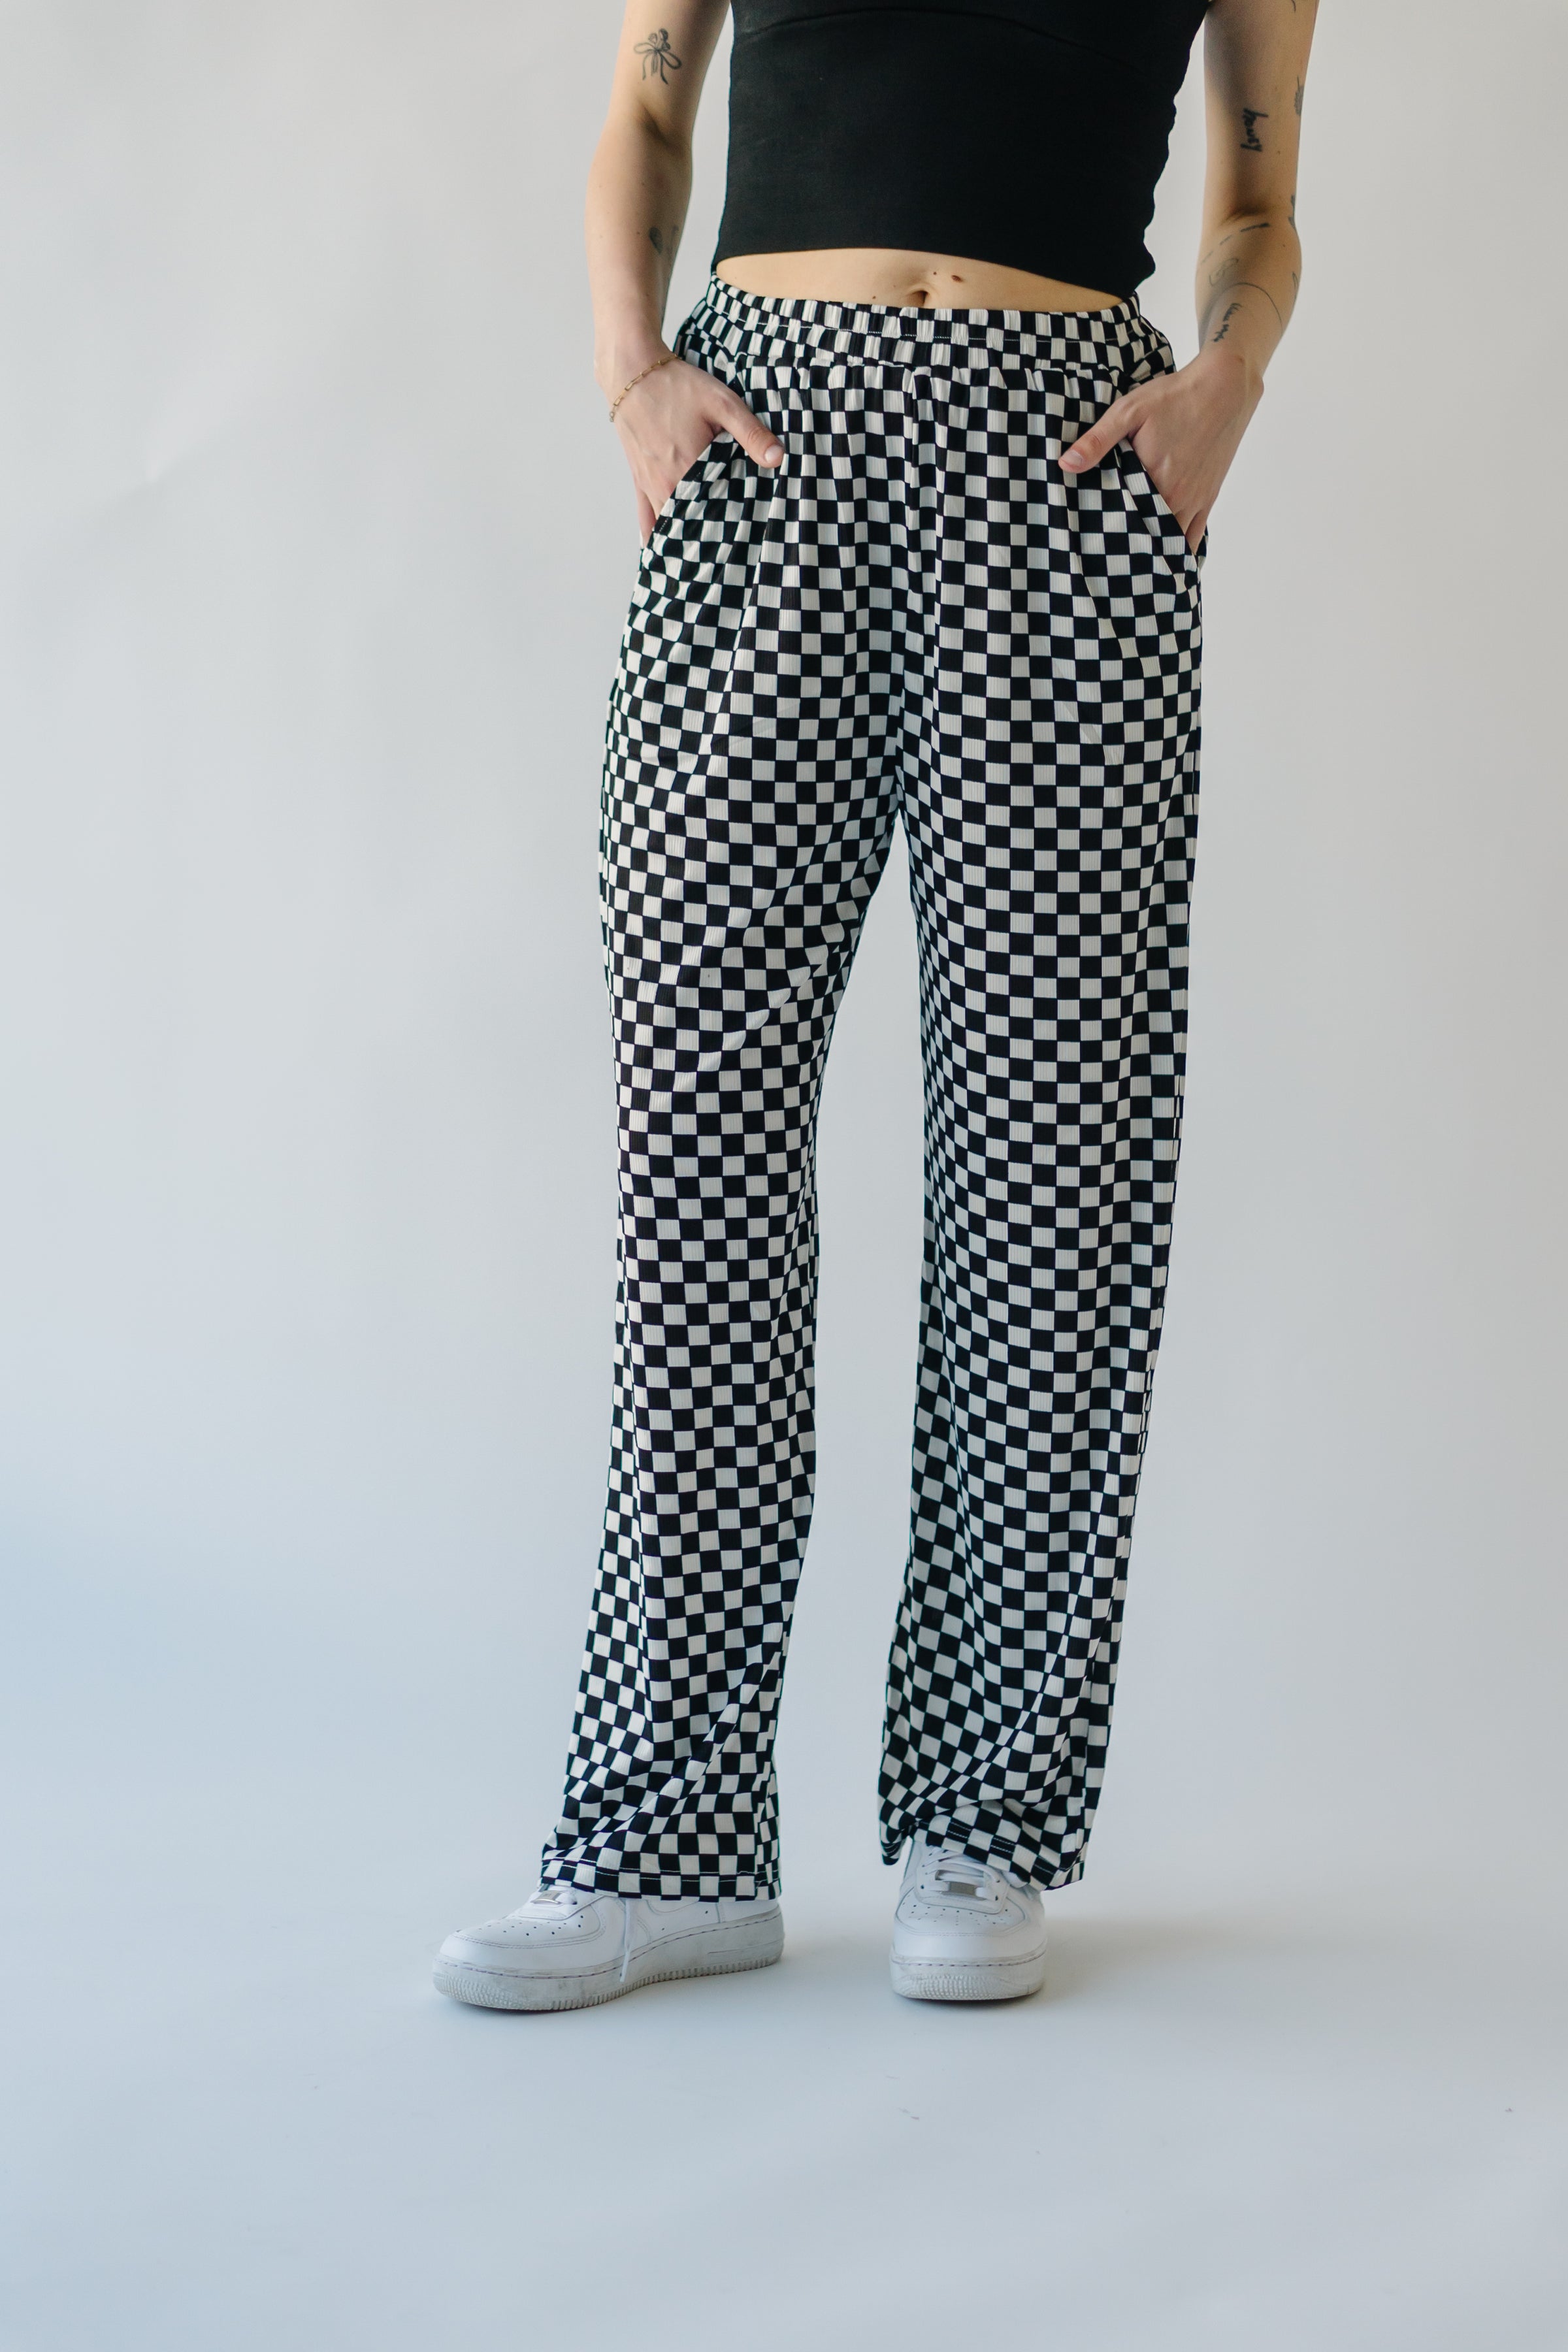 The Telluride Checkered Pants in Black + White – Piper & Scoot